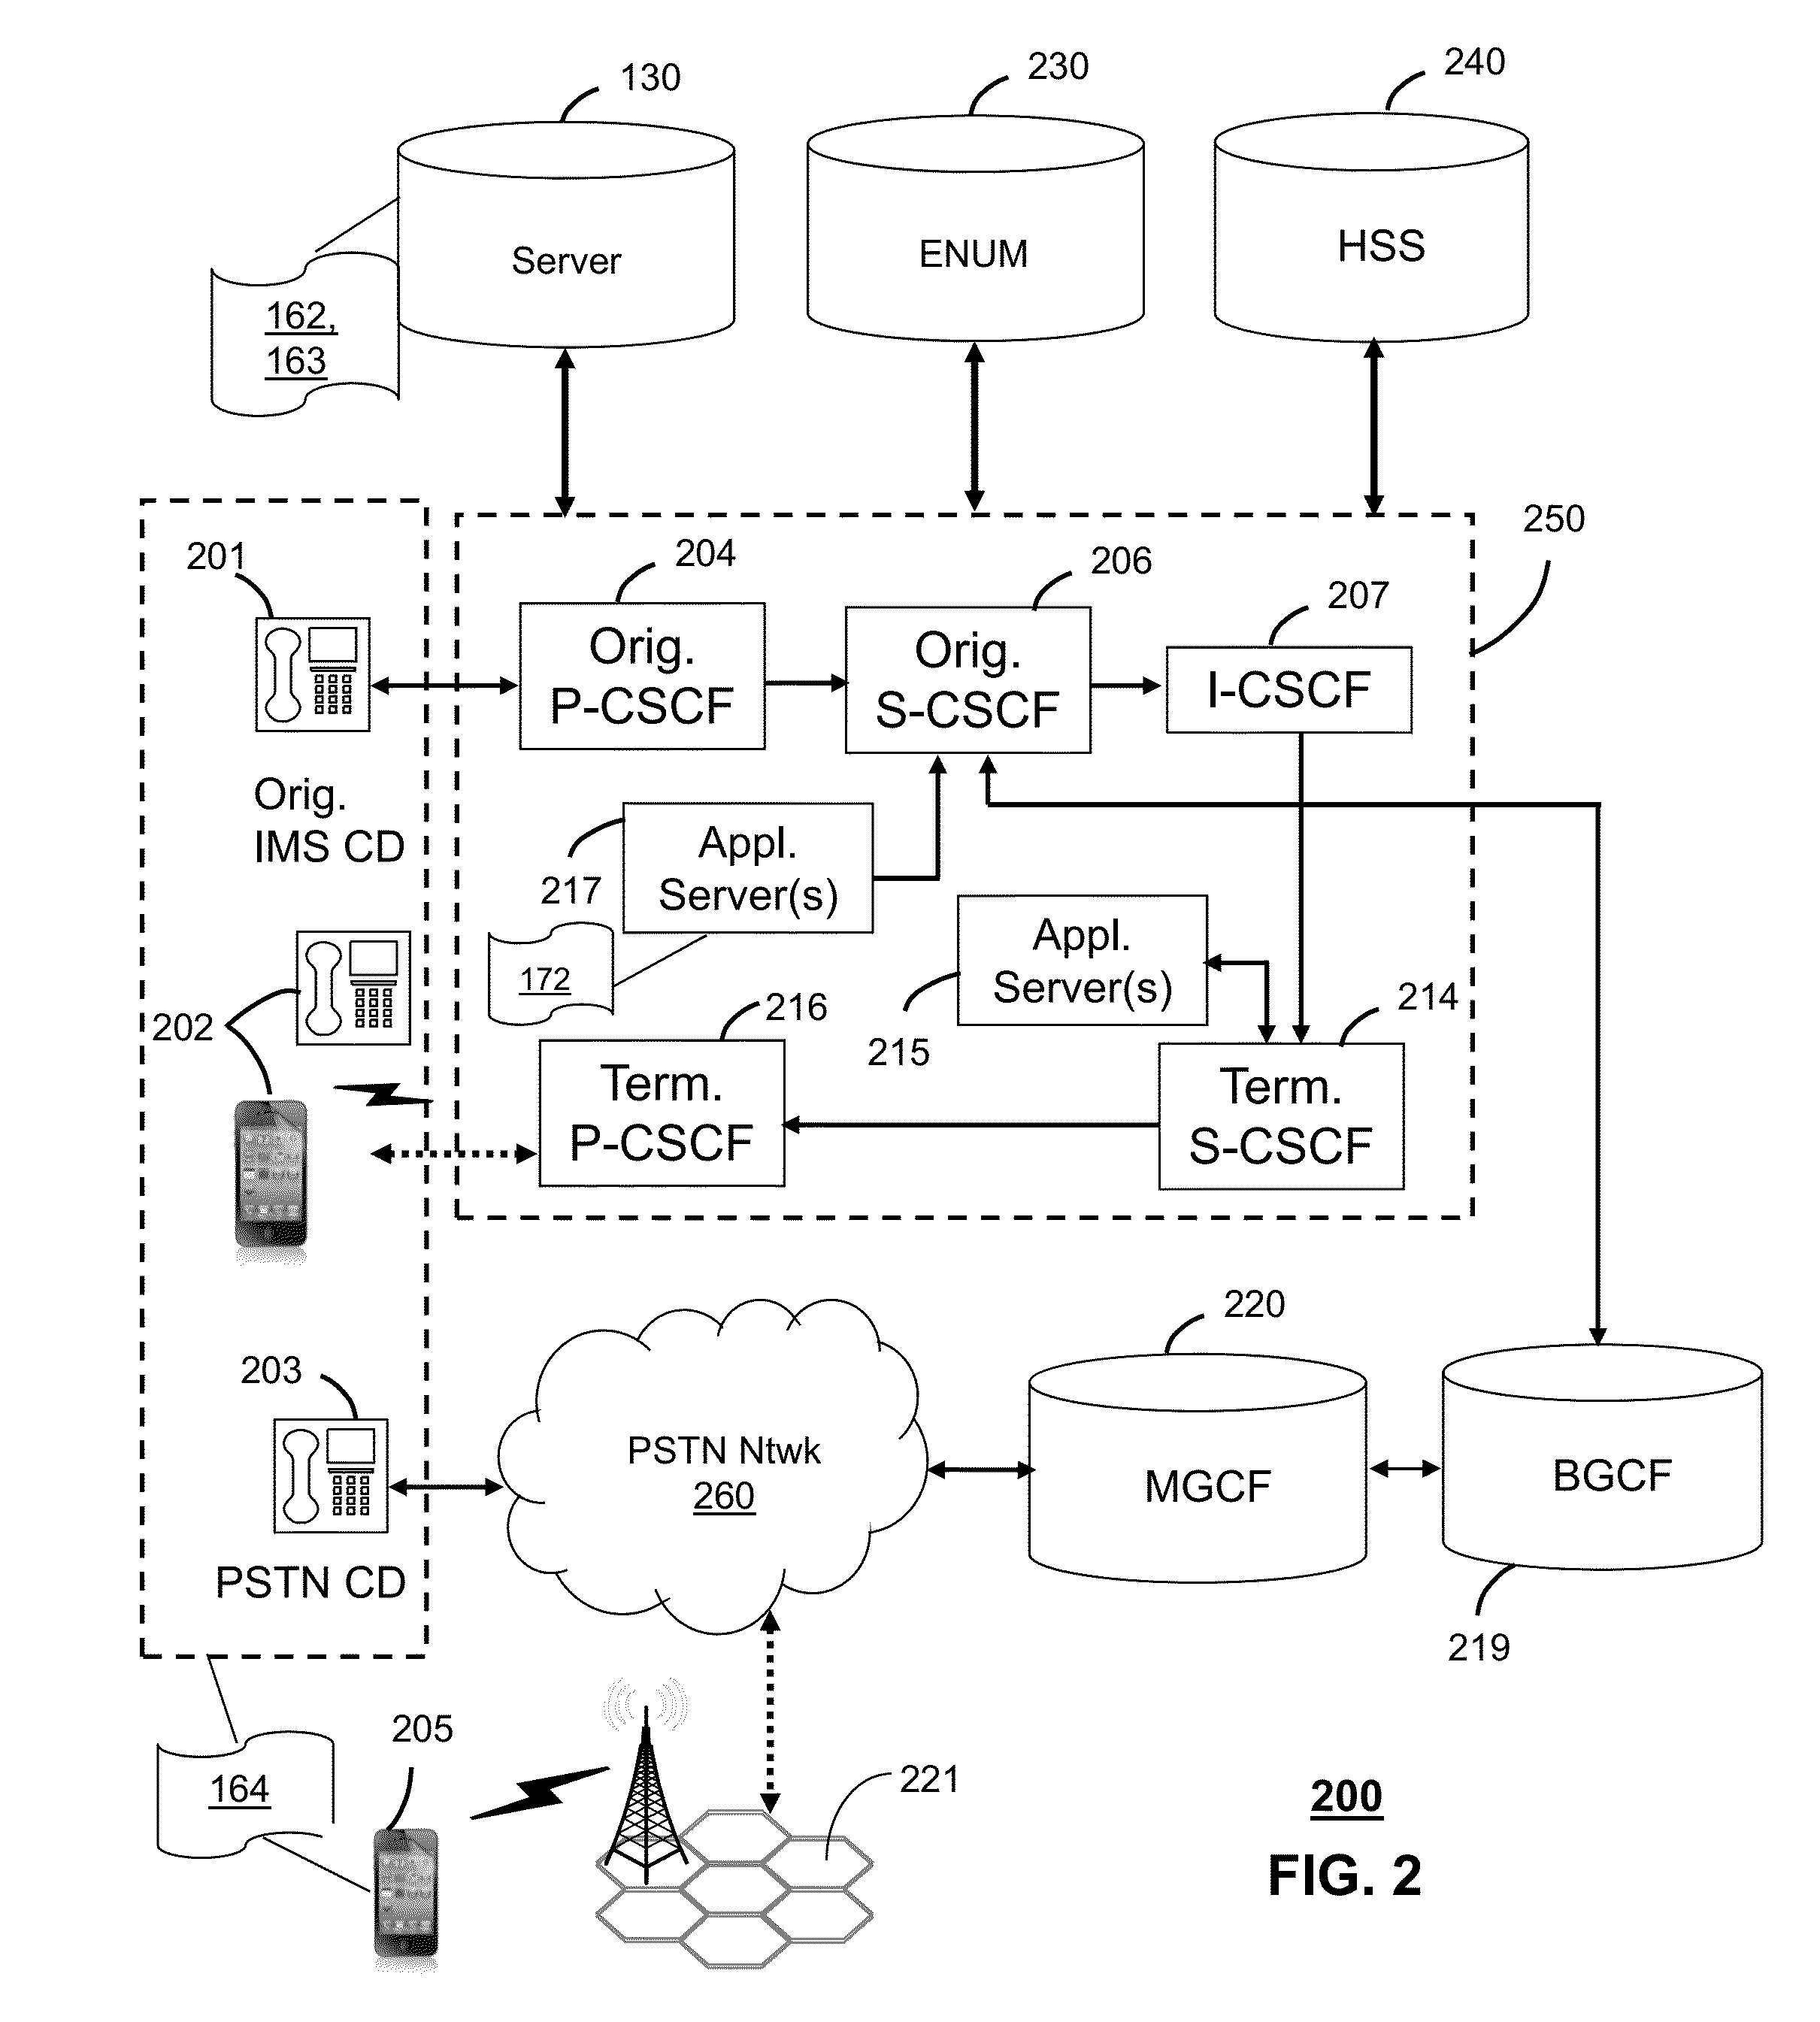 Method and apparatus for managing communication exchanges